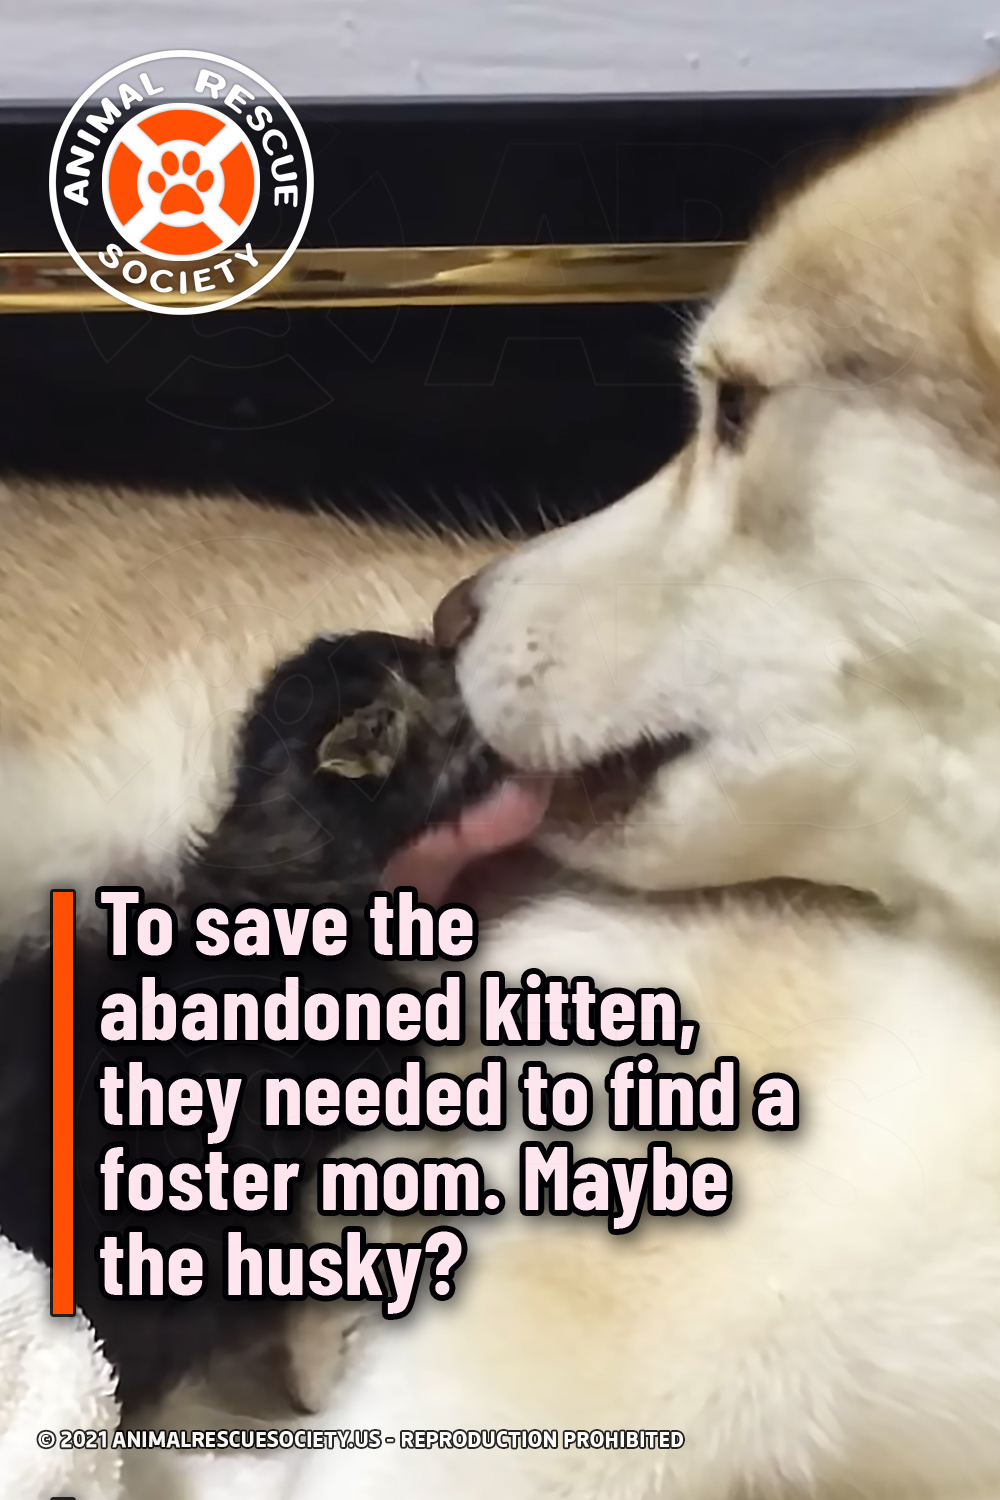 To save the abandoned kitten, they needed to find a foster mom. Maybe the husky?